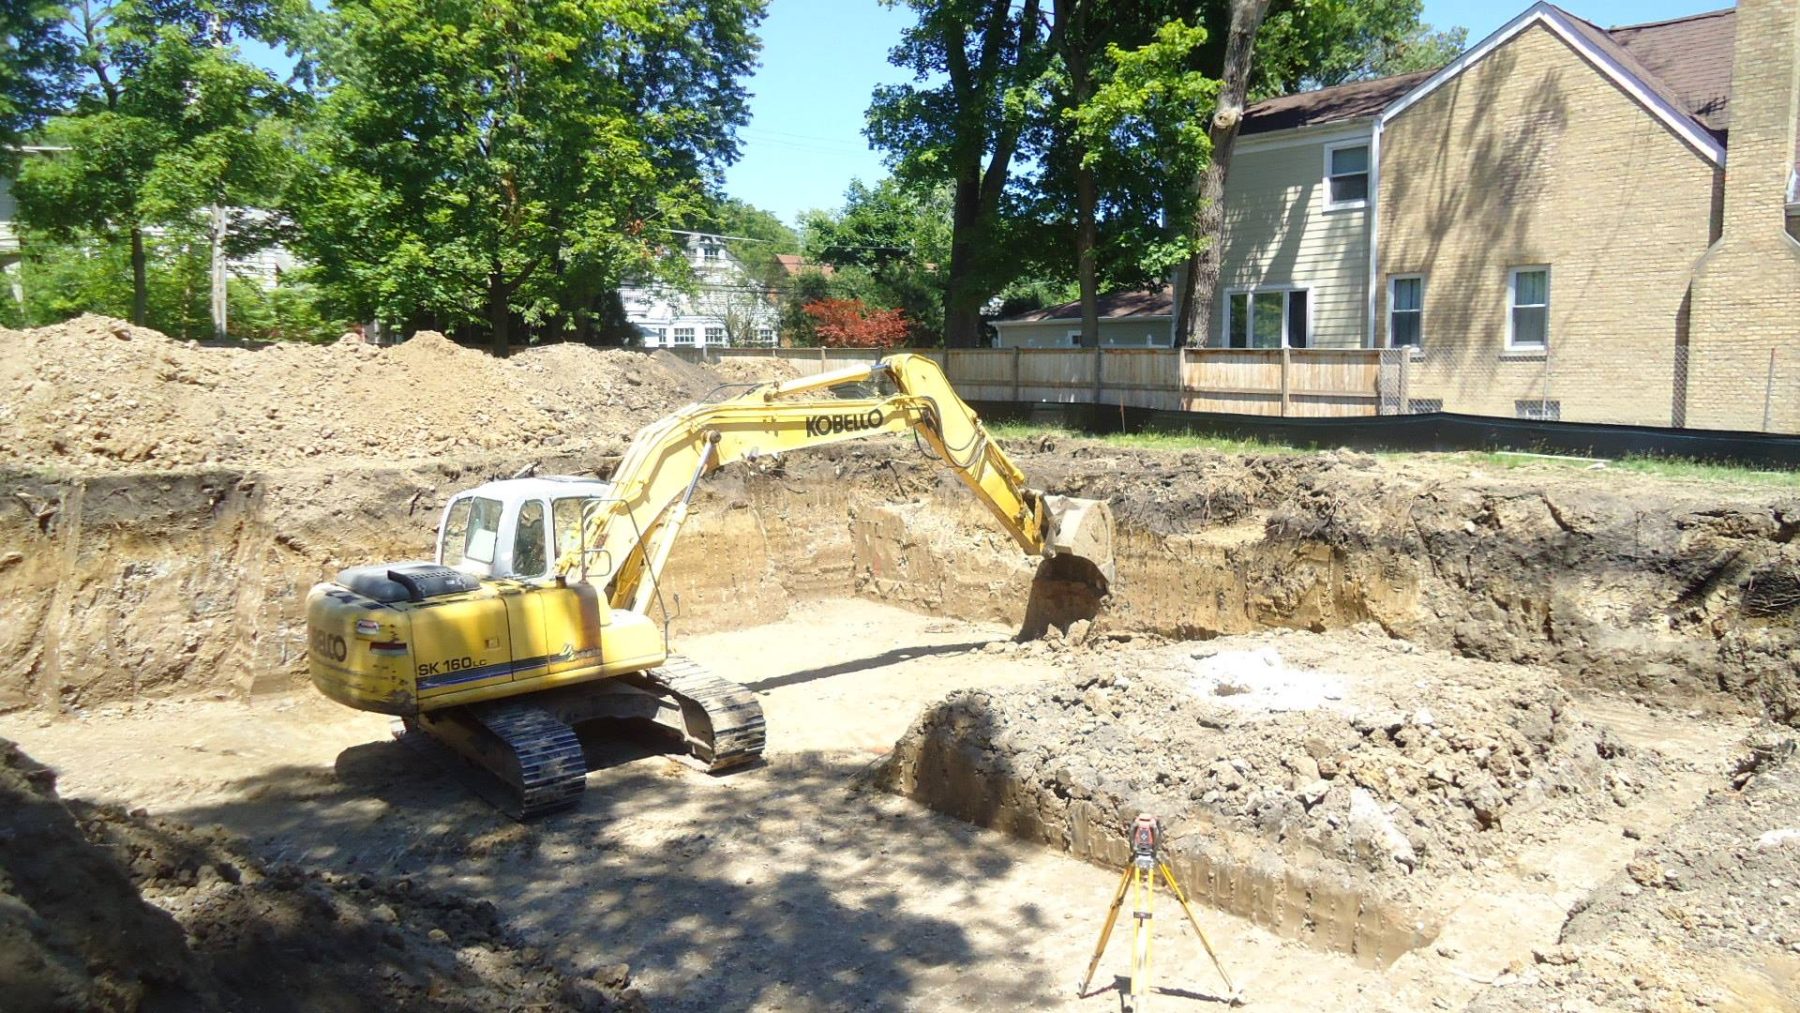 Ecavation is done, the footings have been poured and we are getting ready to frame the walls on our Glenview project